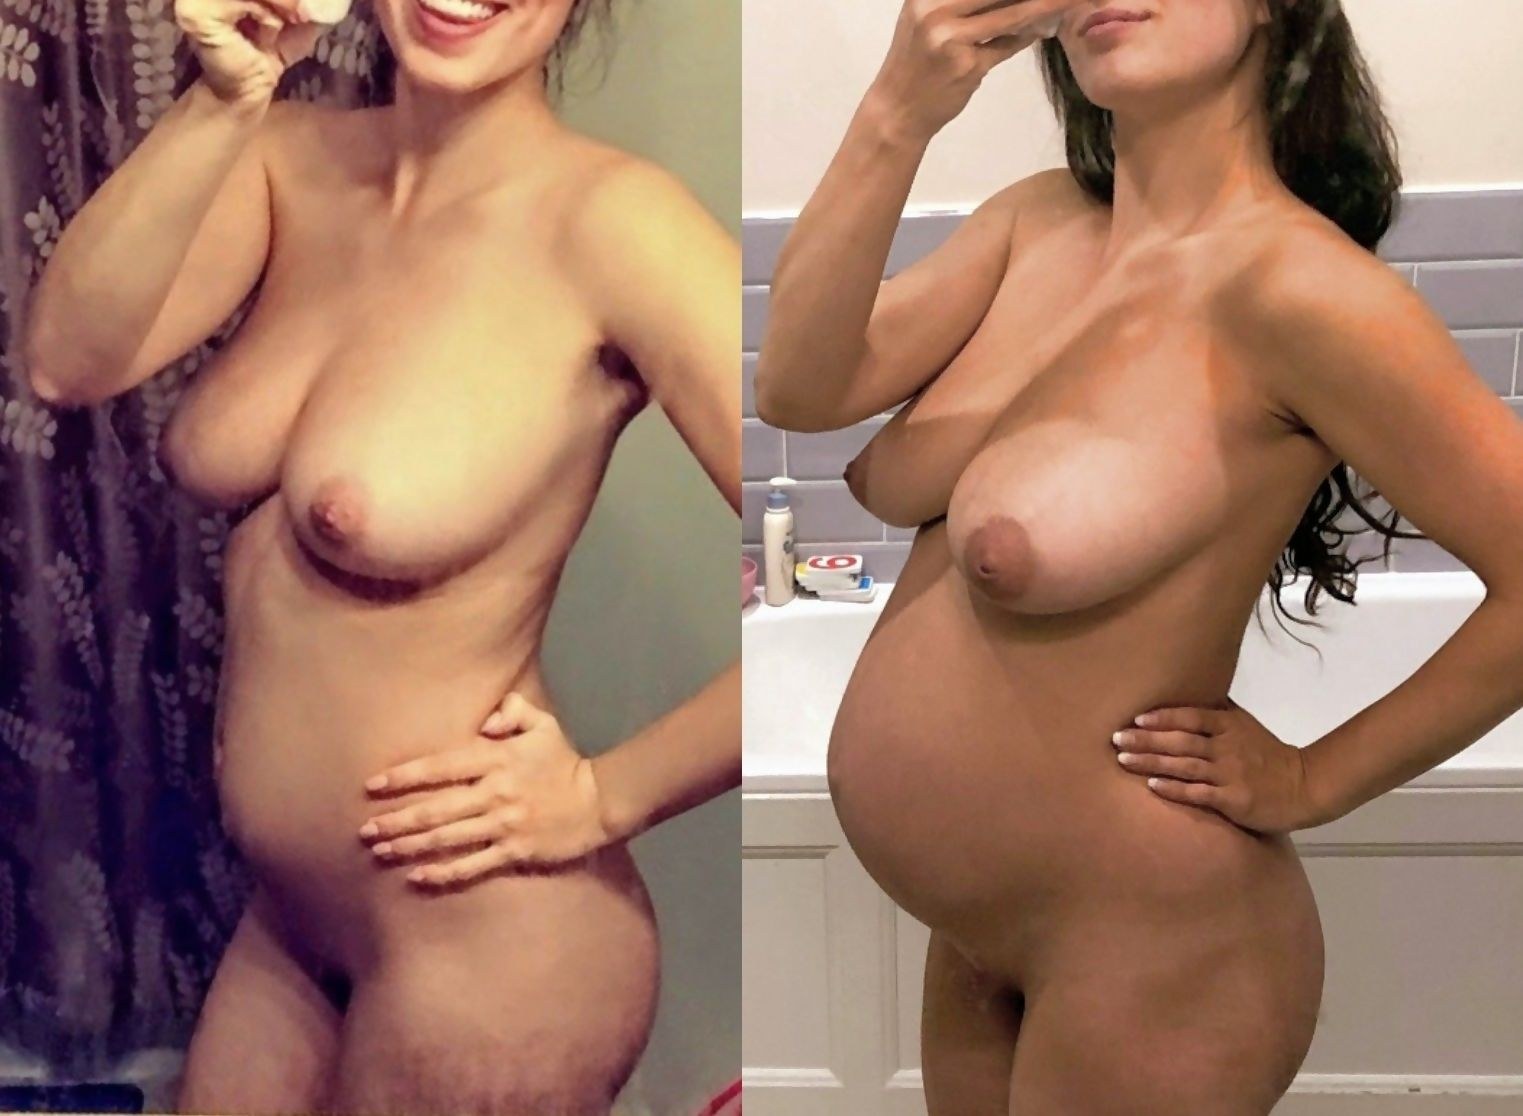 Nude pregnancy progression ❤️ Best adult photos at onlynaked.pics